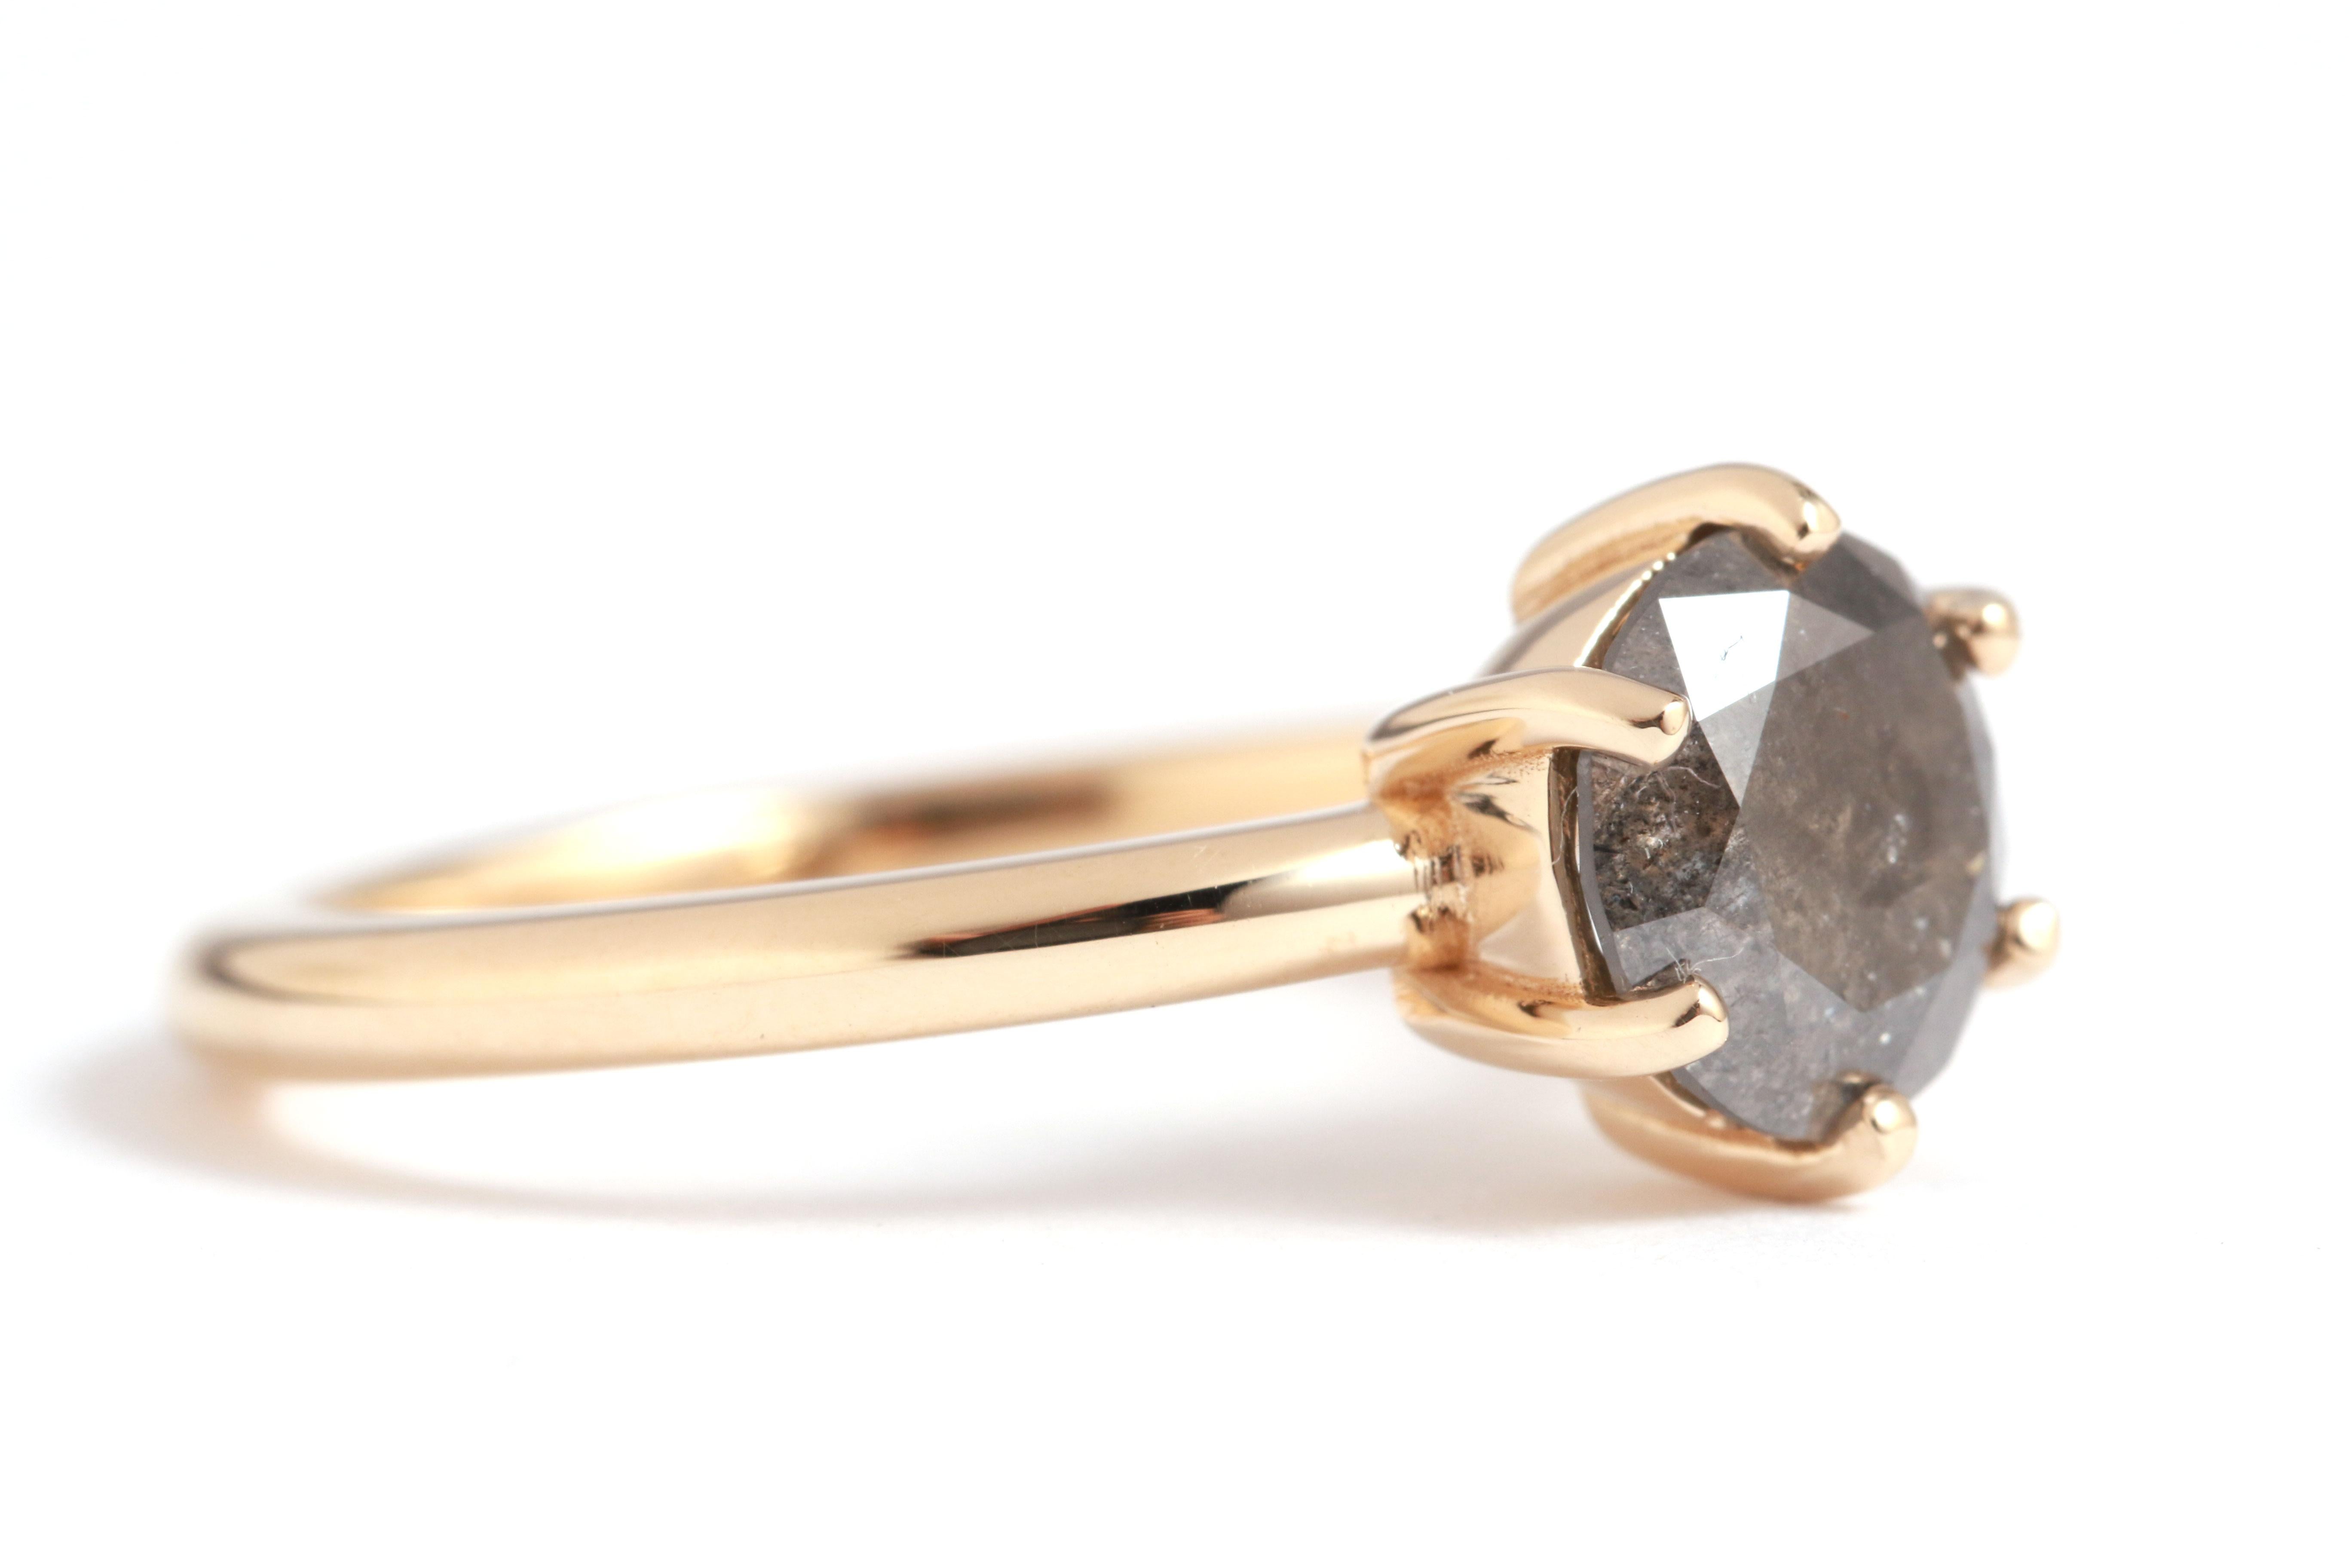 A deep peppery charcoal grey diamond with a classic brilliant cut, it set into a traditional basket prong setting. Completed with a smooth rounded gold band, for the perfect marriage of classic and edgy.

Stone:
Black and Grey Brilliant Cut Diamond,